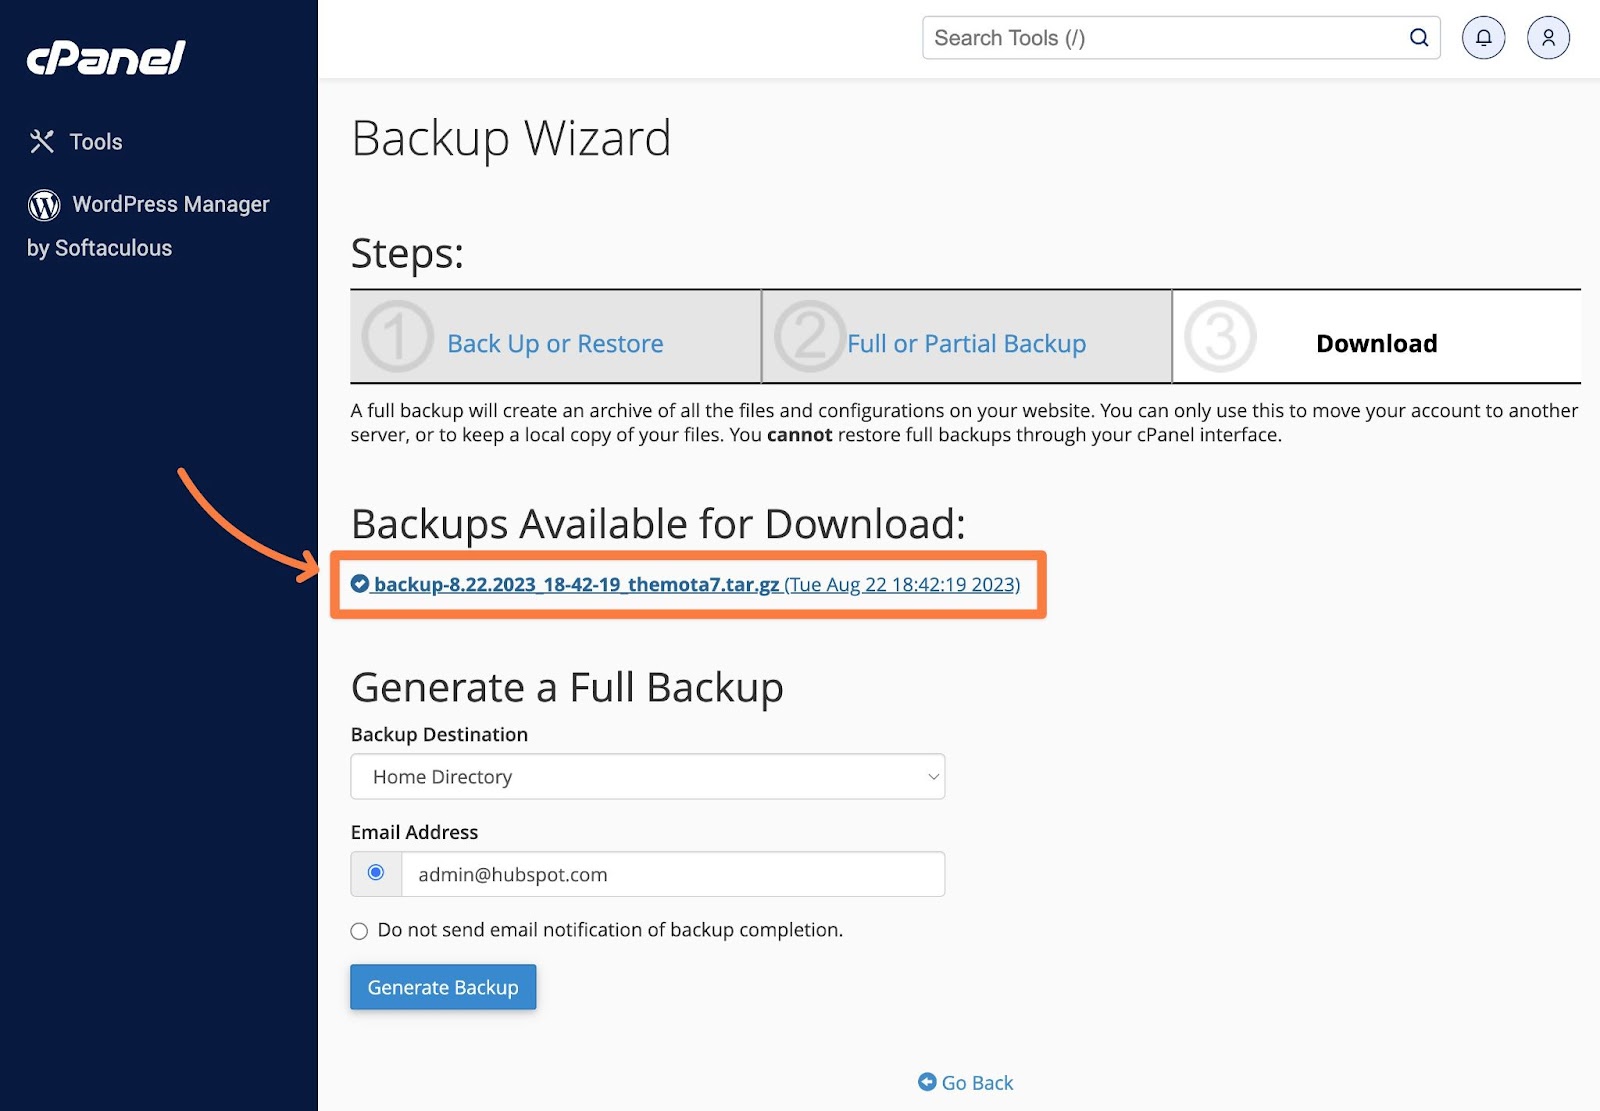 Download a copy of your backup to your local computer to keep it safe.